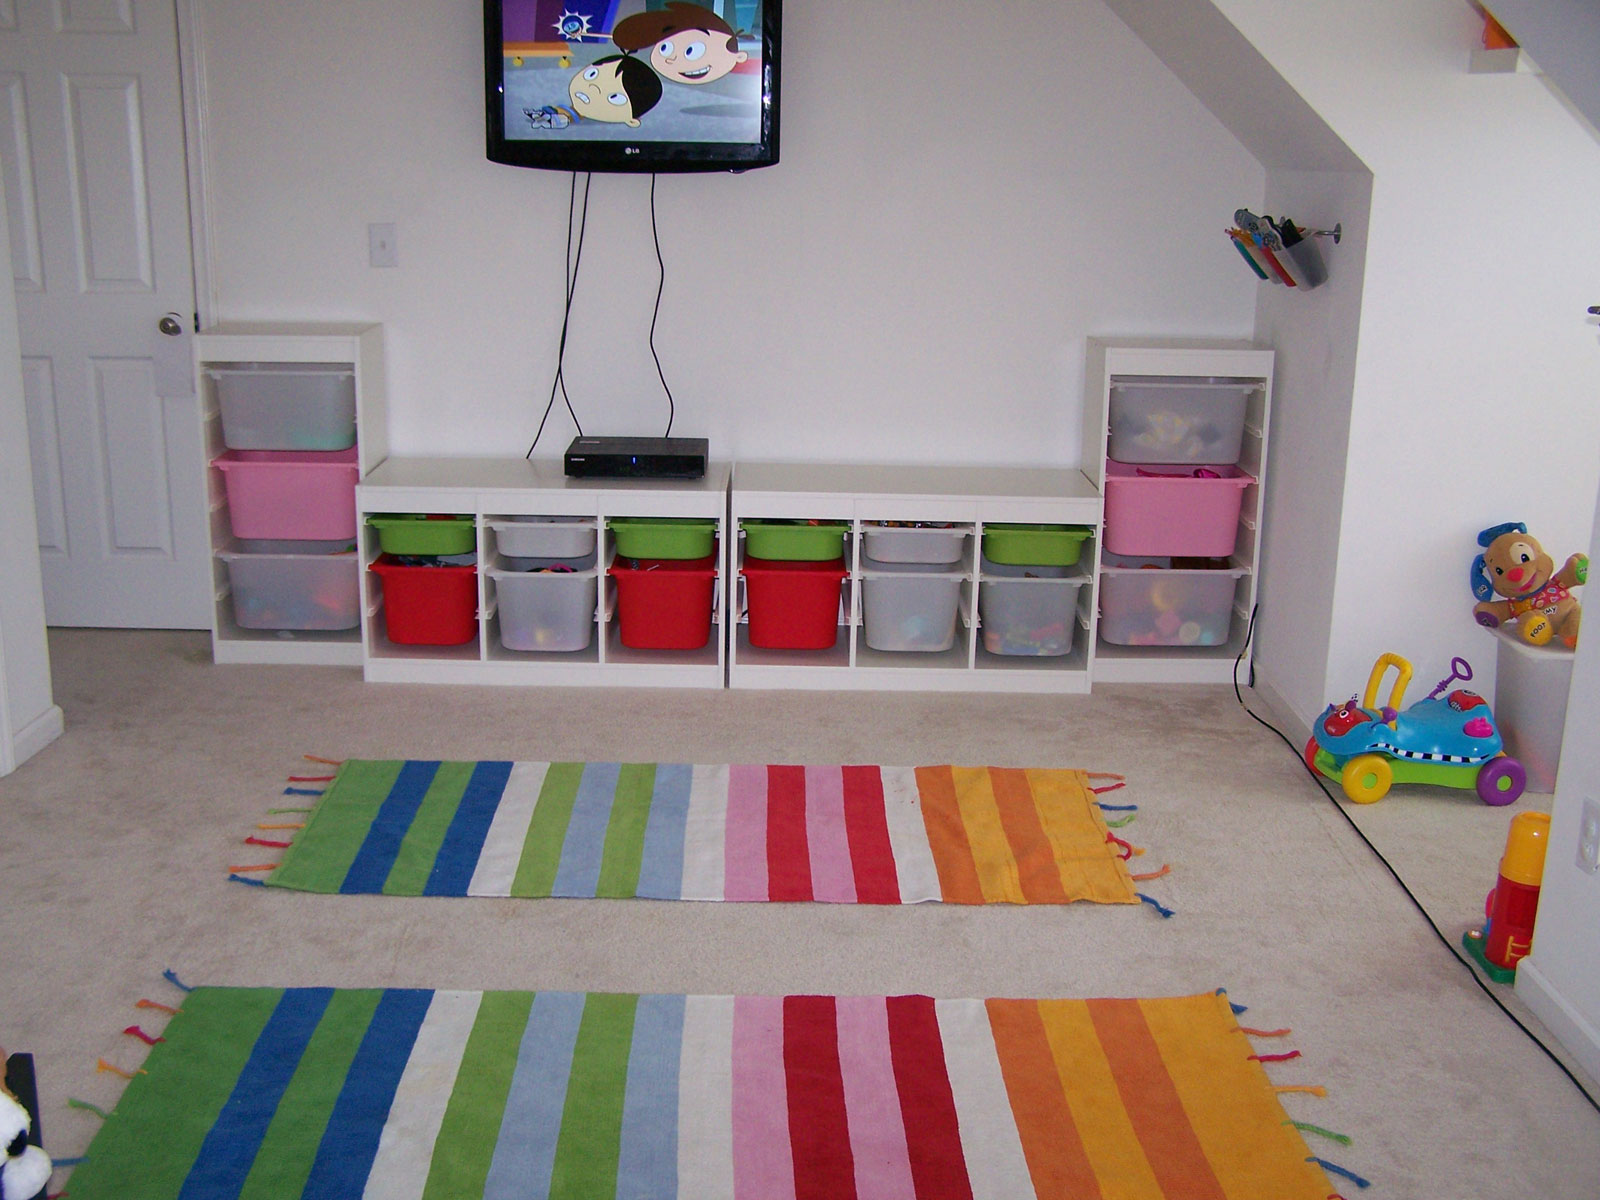 Kids Room Wall Charming Kids Room Applying White Wall Color Furnished With Cupboards Of Kids Room Storage Completed With Wall TV And Rug In Colorful Striped Color Kids Room The Two Ideas For Making The Kids Room Storage